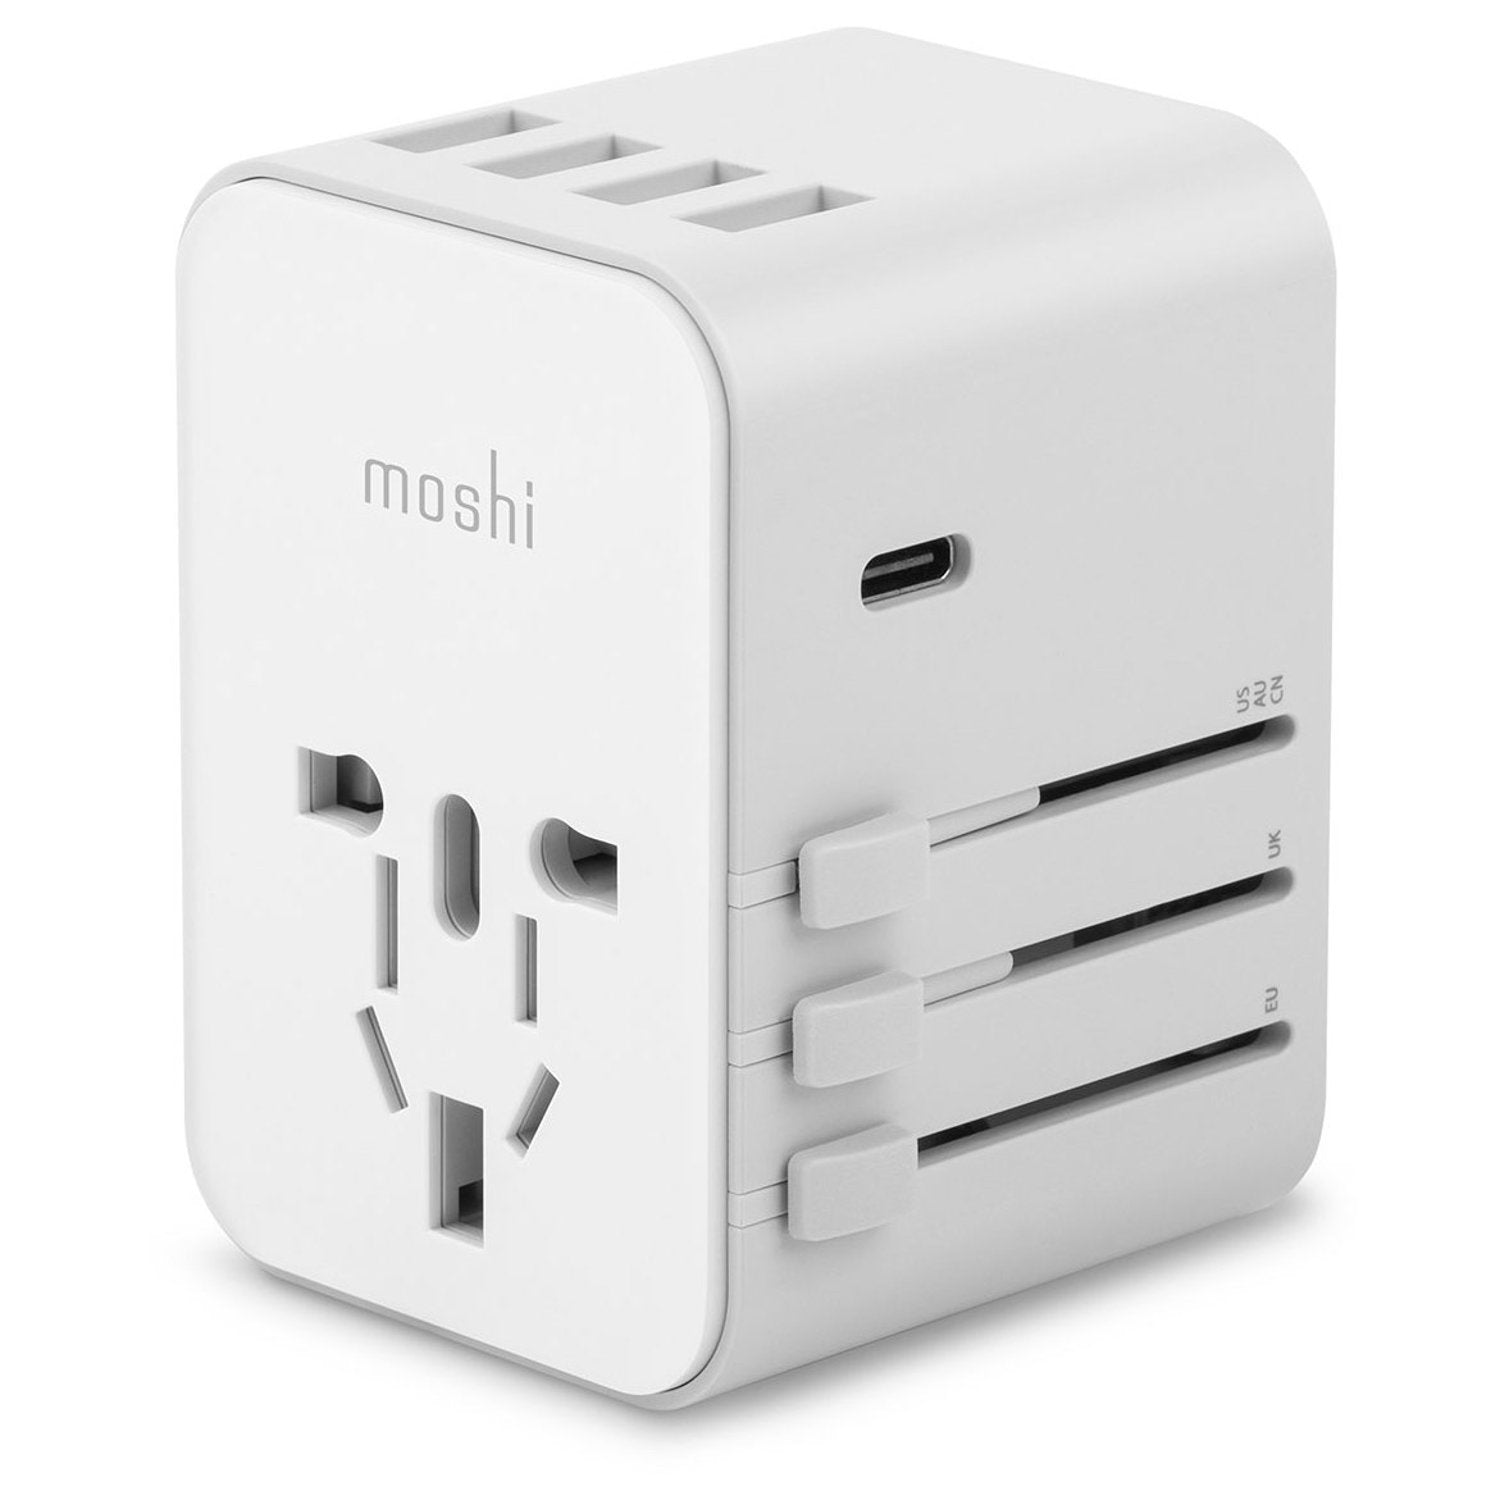 Moshi World Travel Adapter with USB-C and 4 USB Ports - White